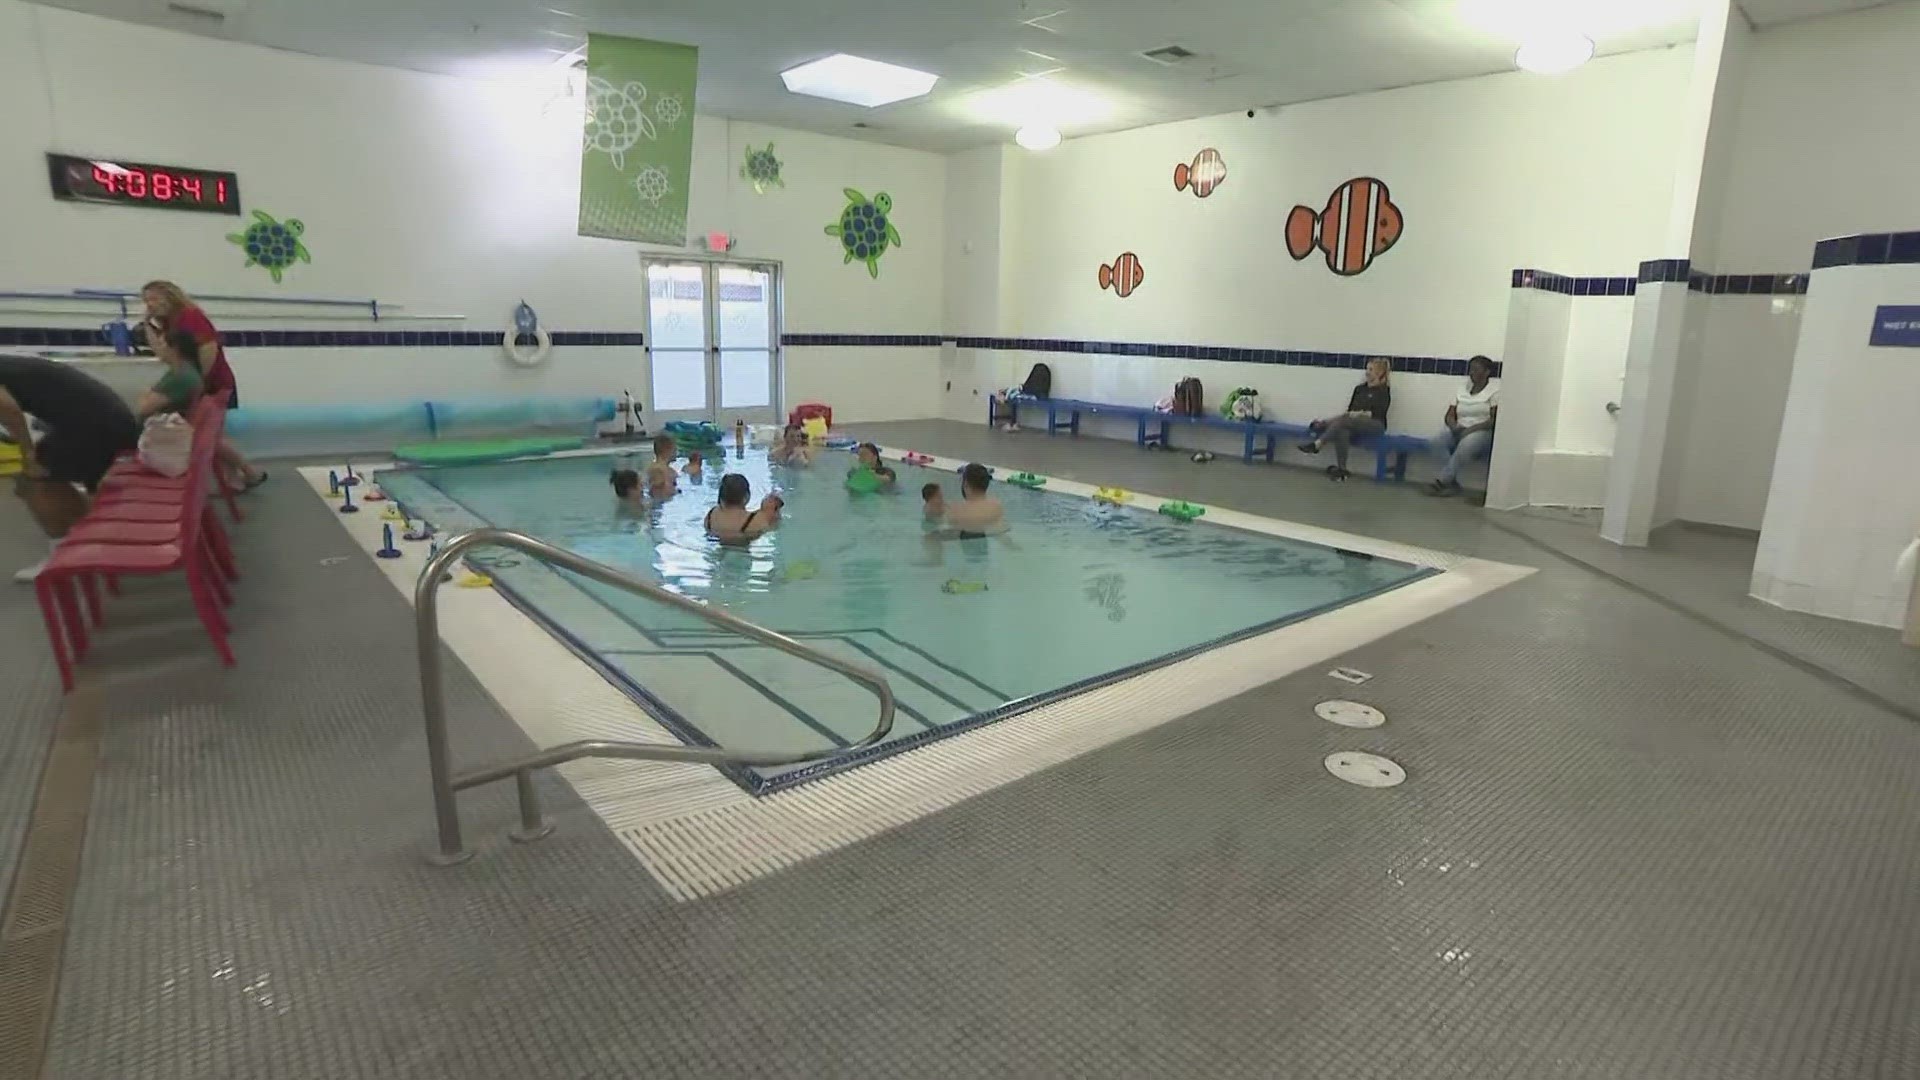 An instructor with Hubbard Family Swim School told 12News the best learning happens when kids are enjoying what they’re doing.